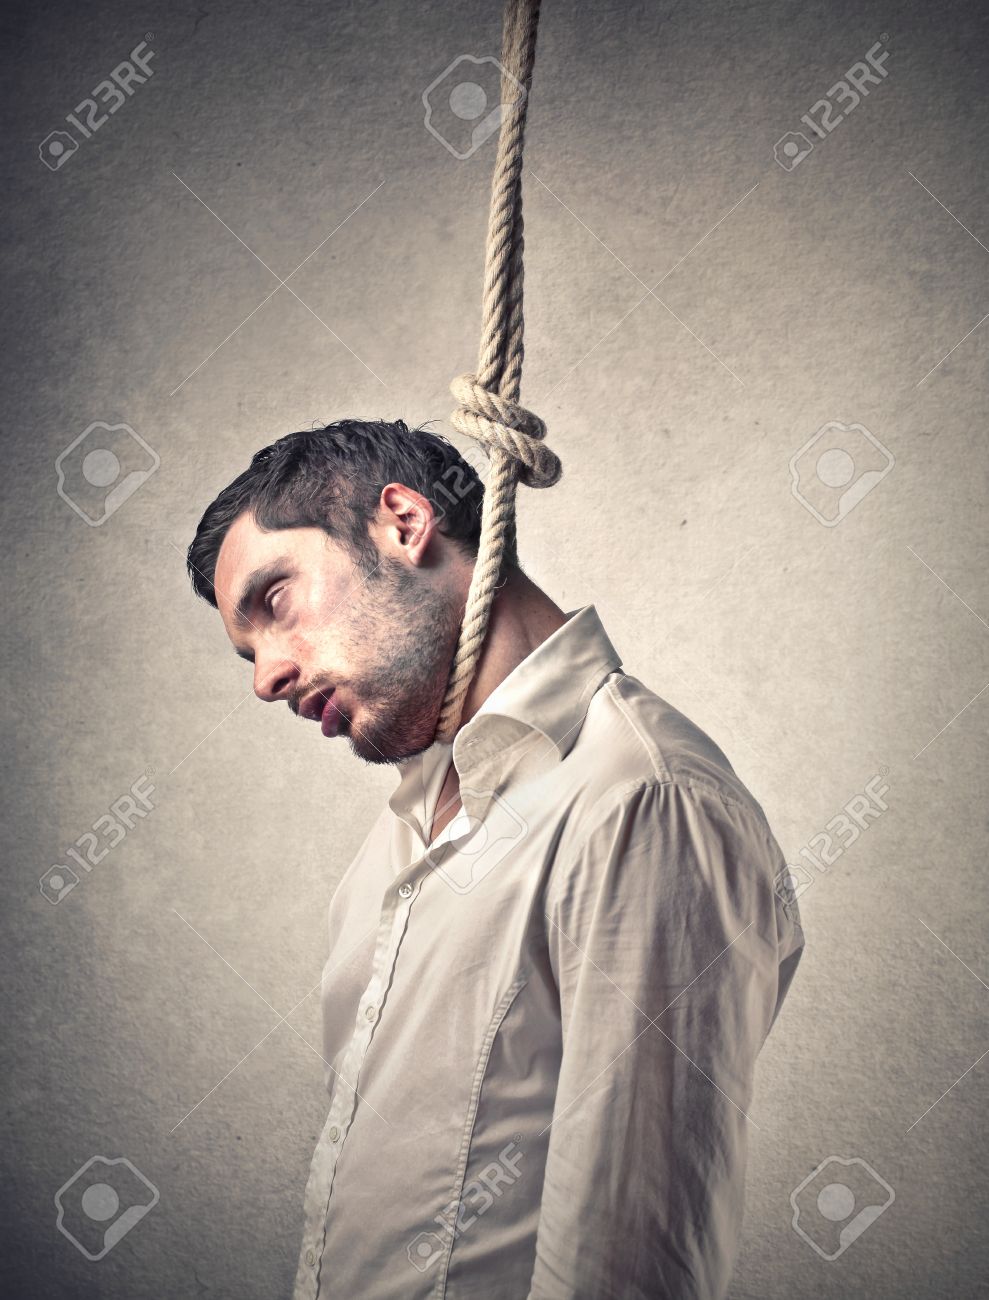 Image result for man hanging from rope